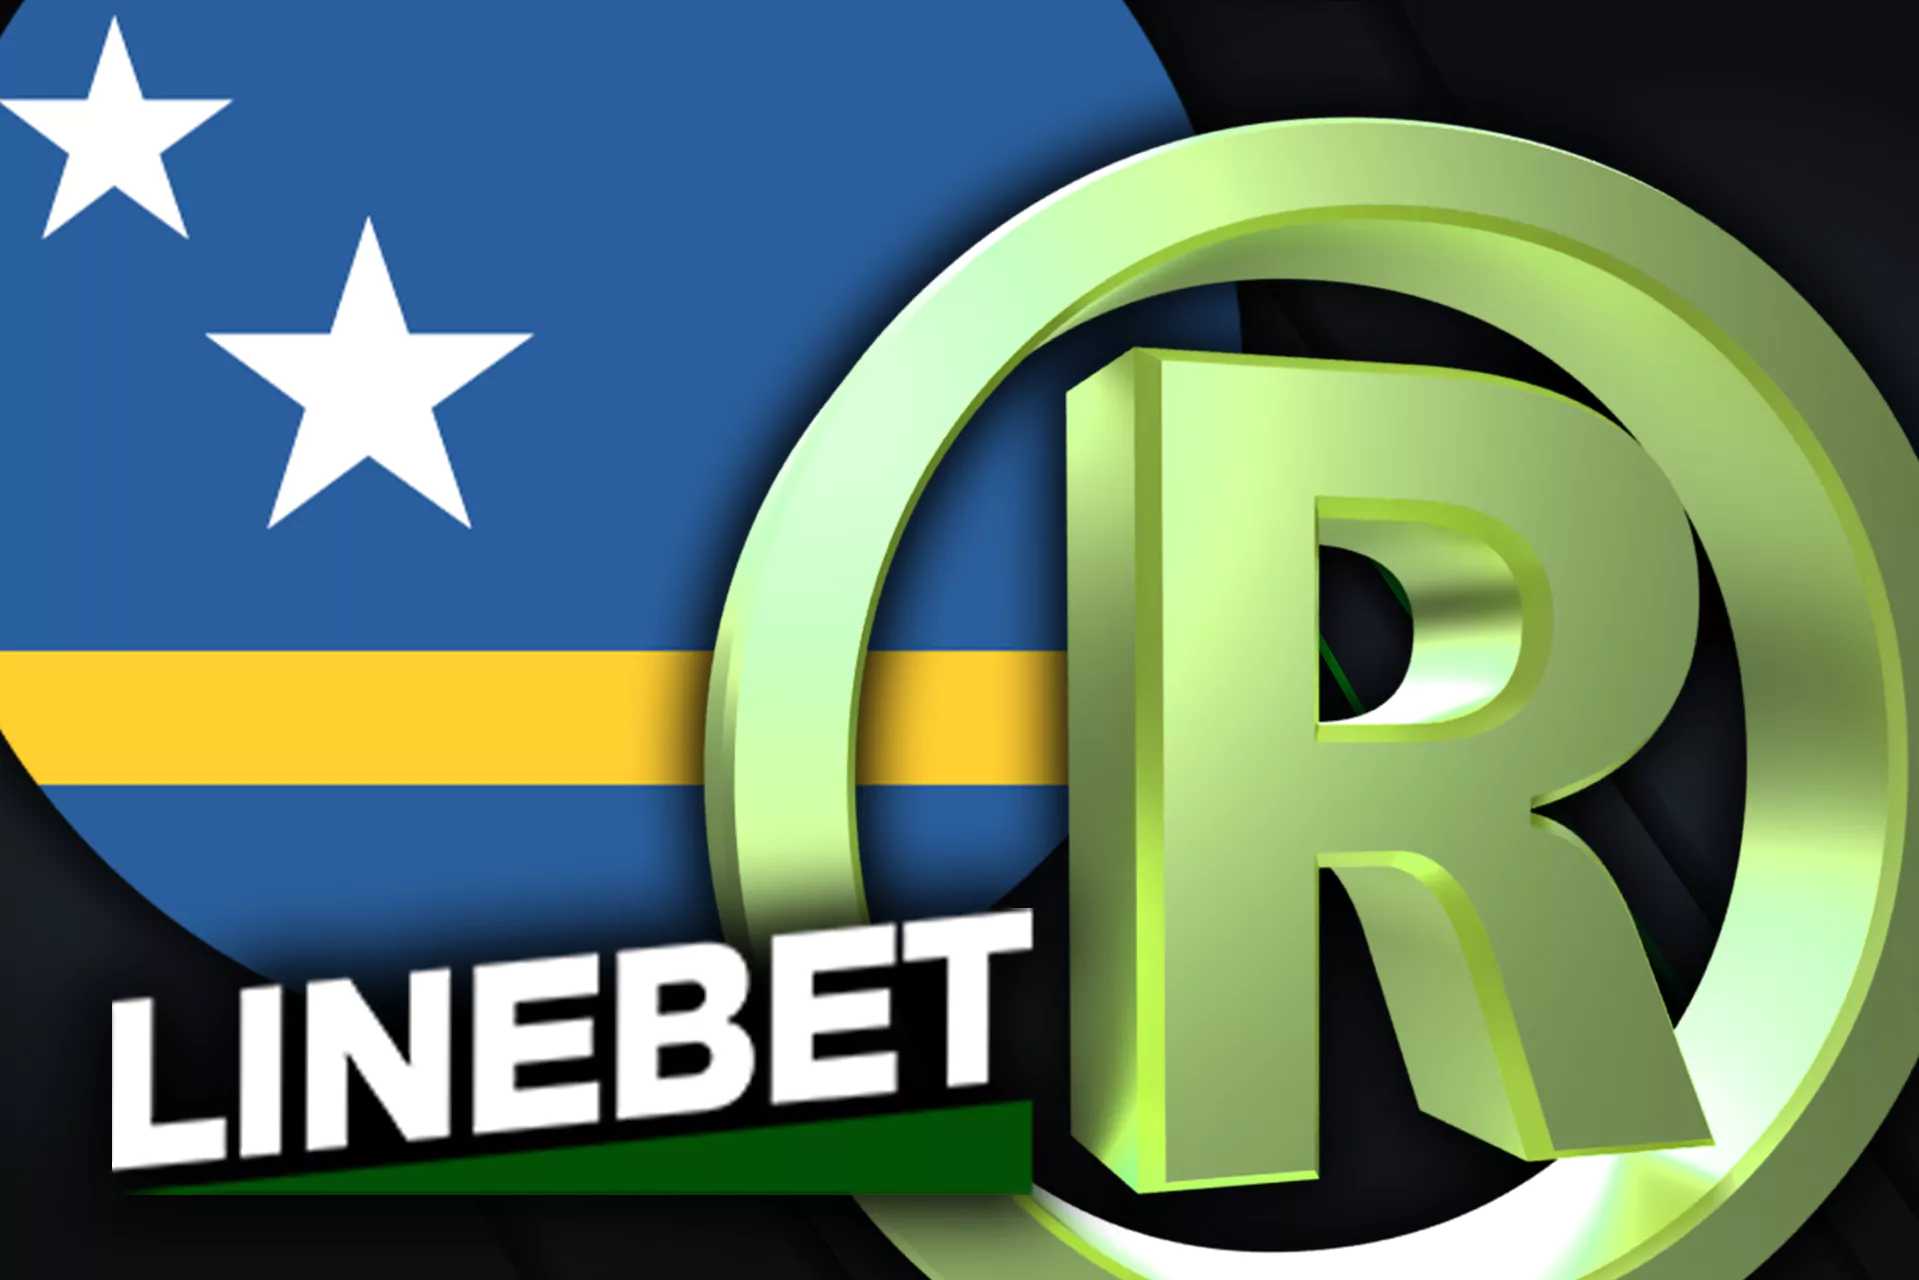 Linebet itself is not owned by the Curacao eHaming Commission.